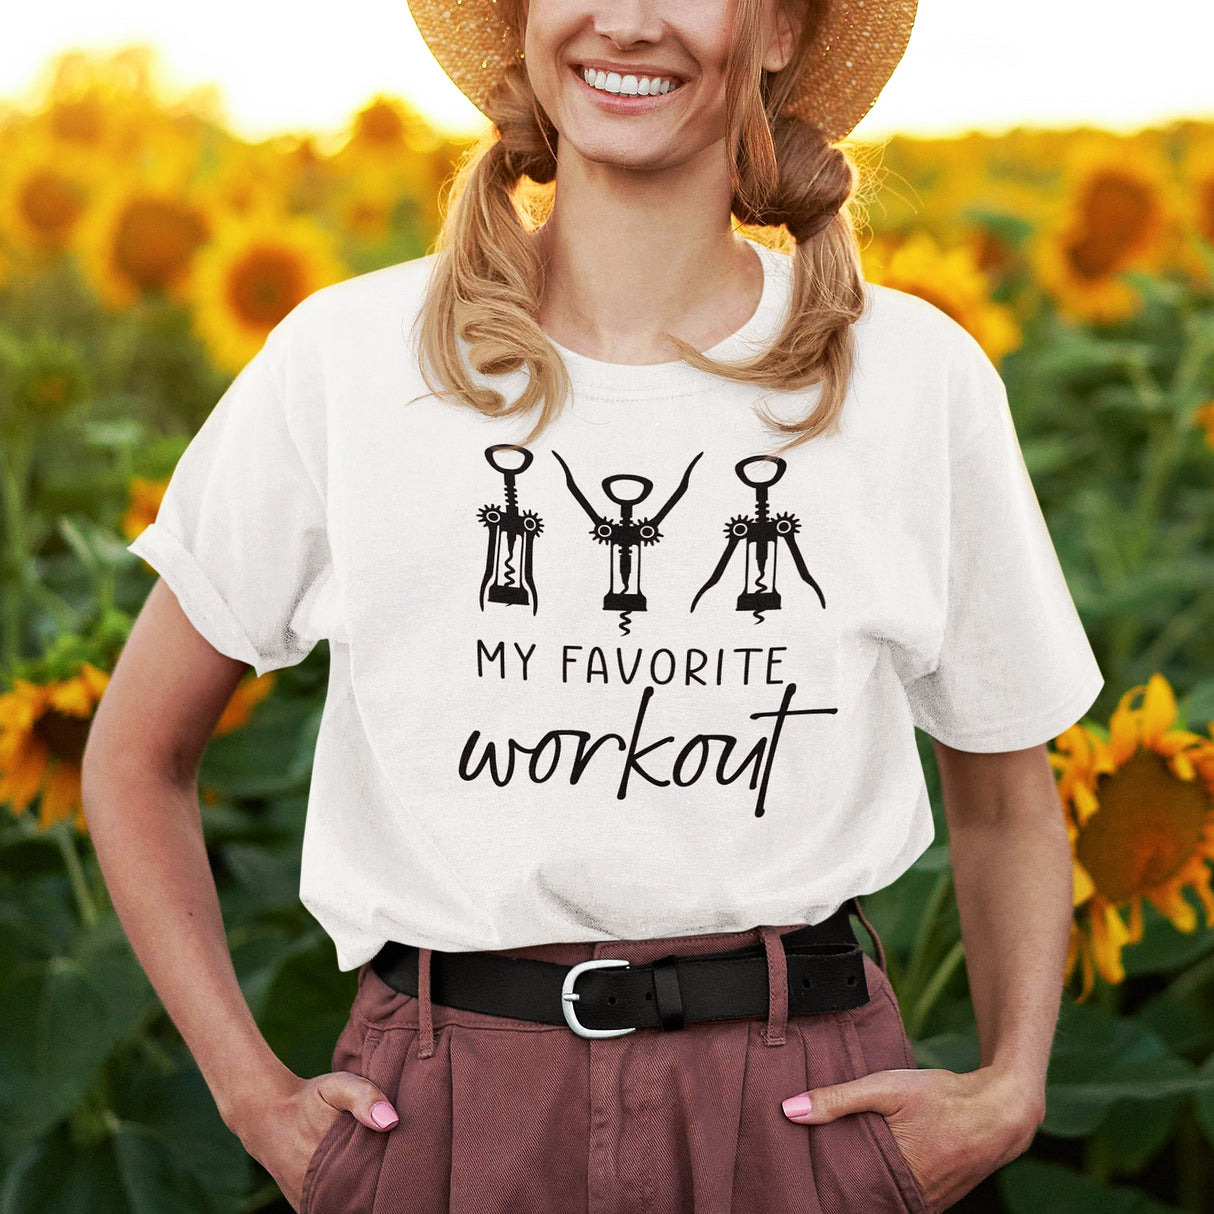 my-favorite-workout-wine-bottle-openers-fitness-tee-food-t-shirt-fitness-tee-wine-t-shirt-humor-tee#color_white